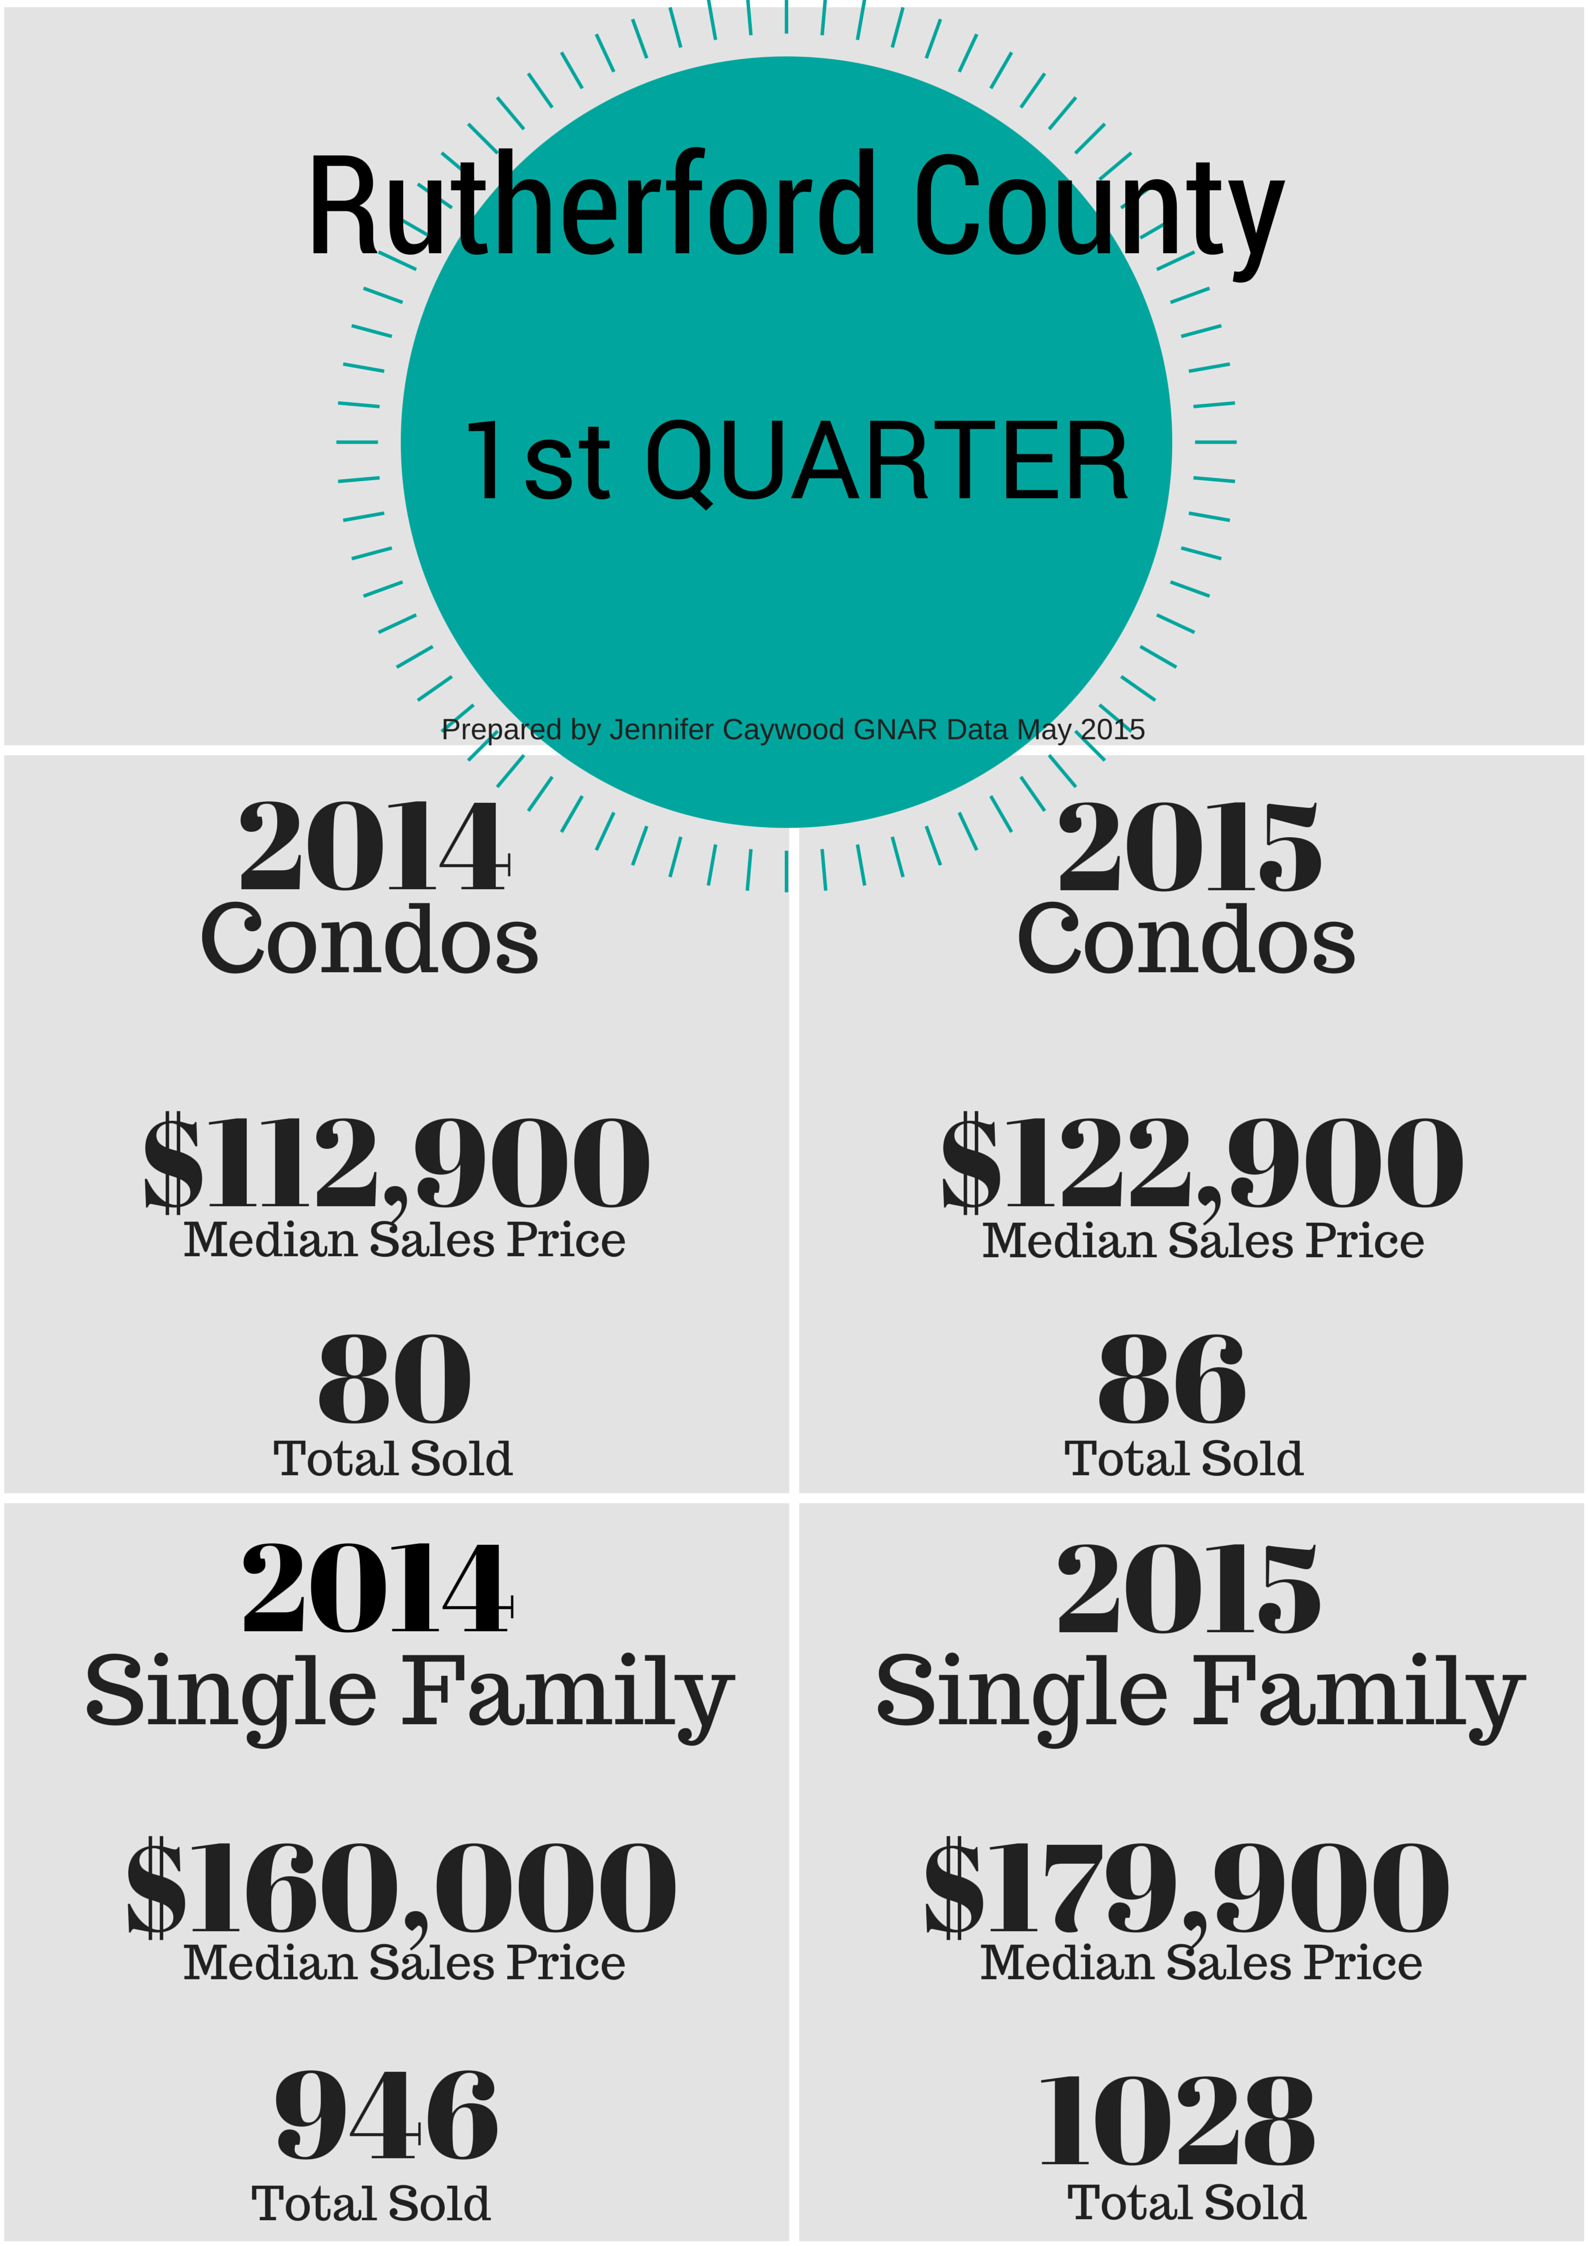 Rutherford County 1st Quarter 2015 Home Sales